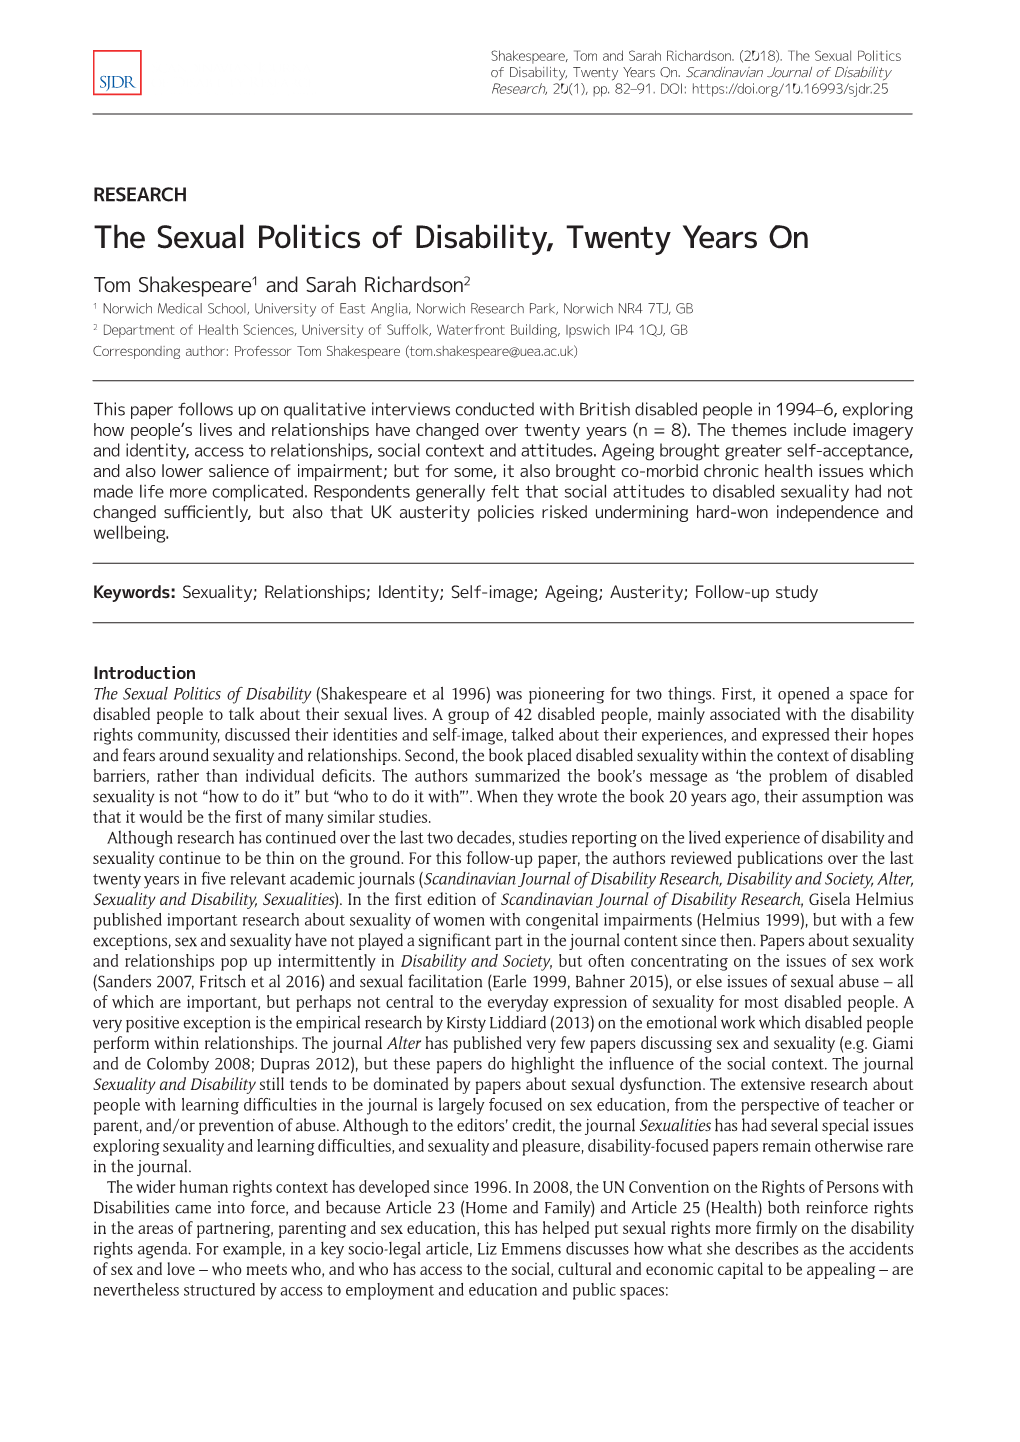 The Sexual Politics of Disability, Twenty Years On